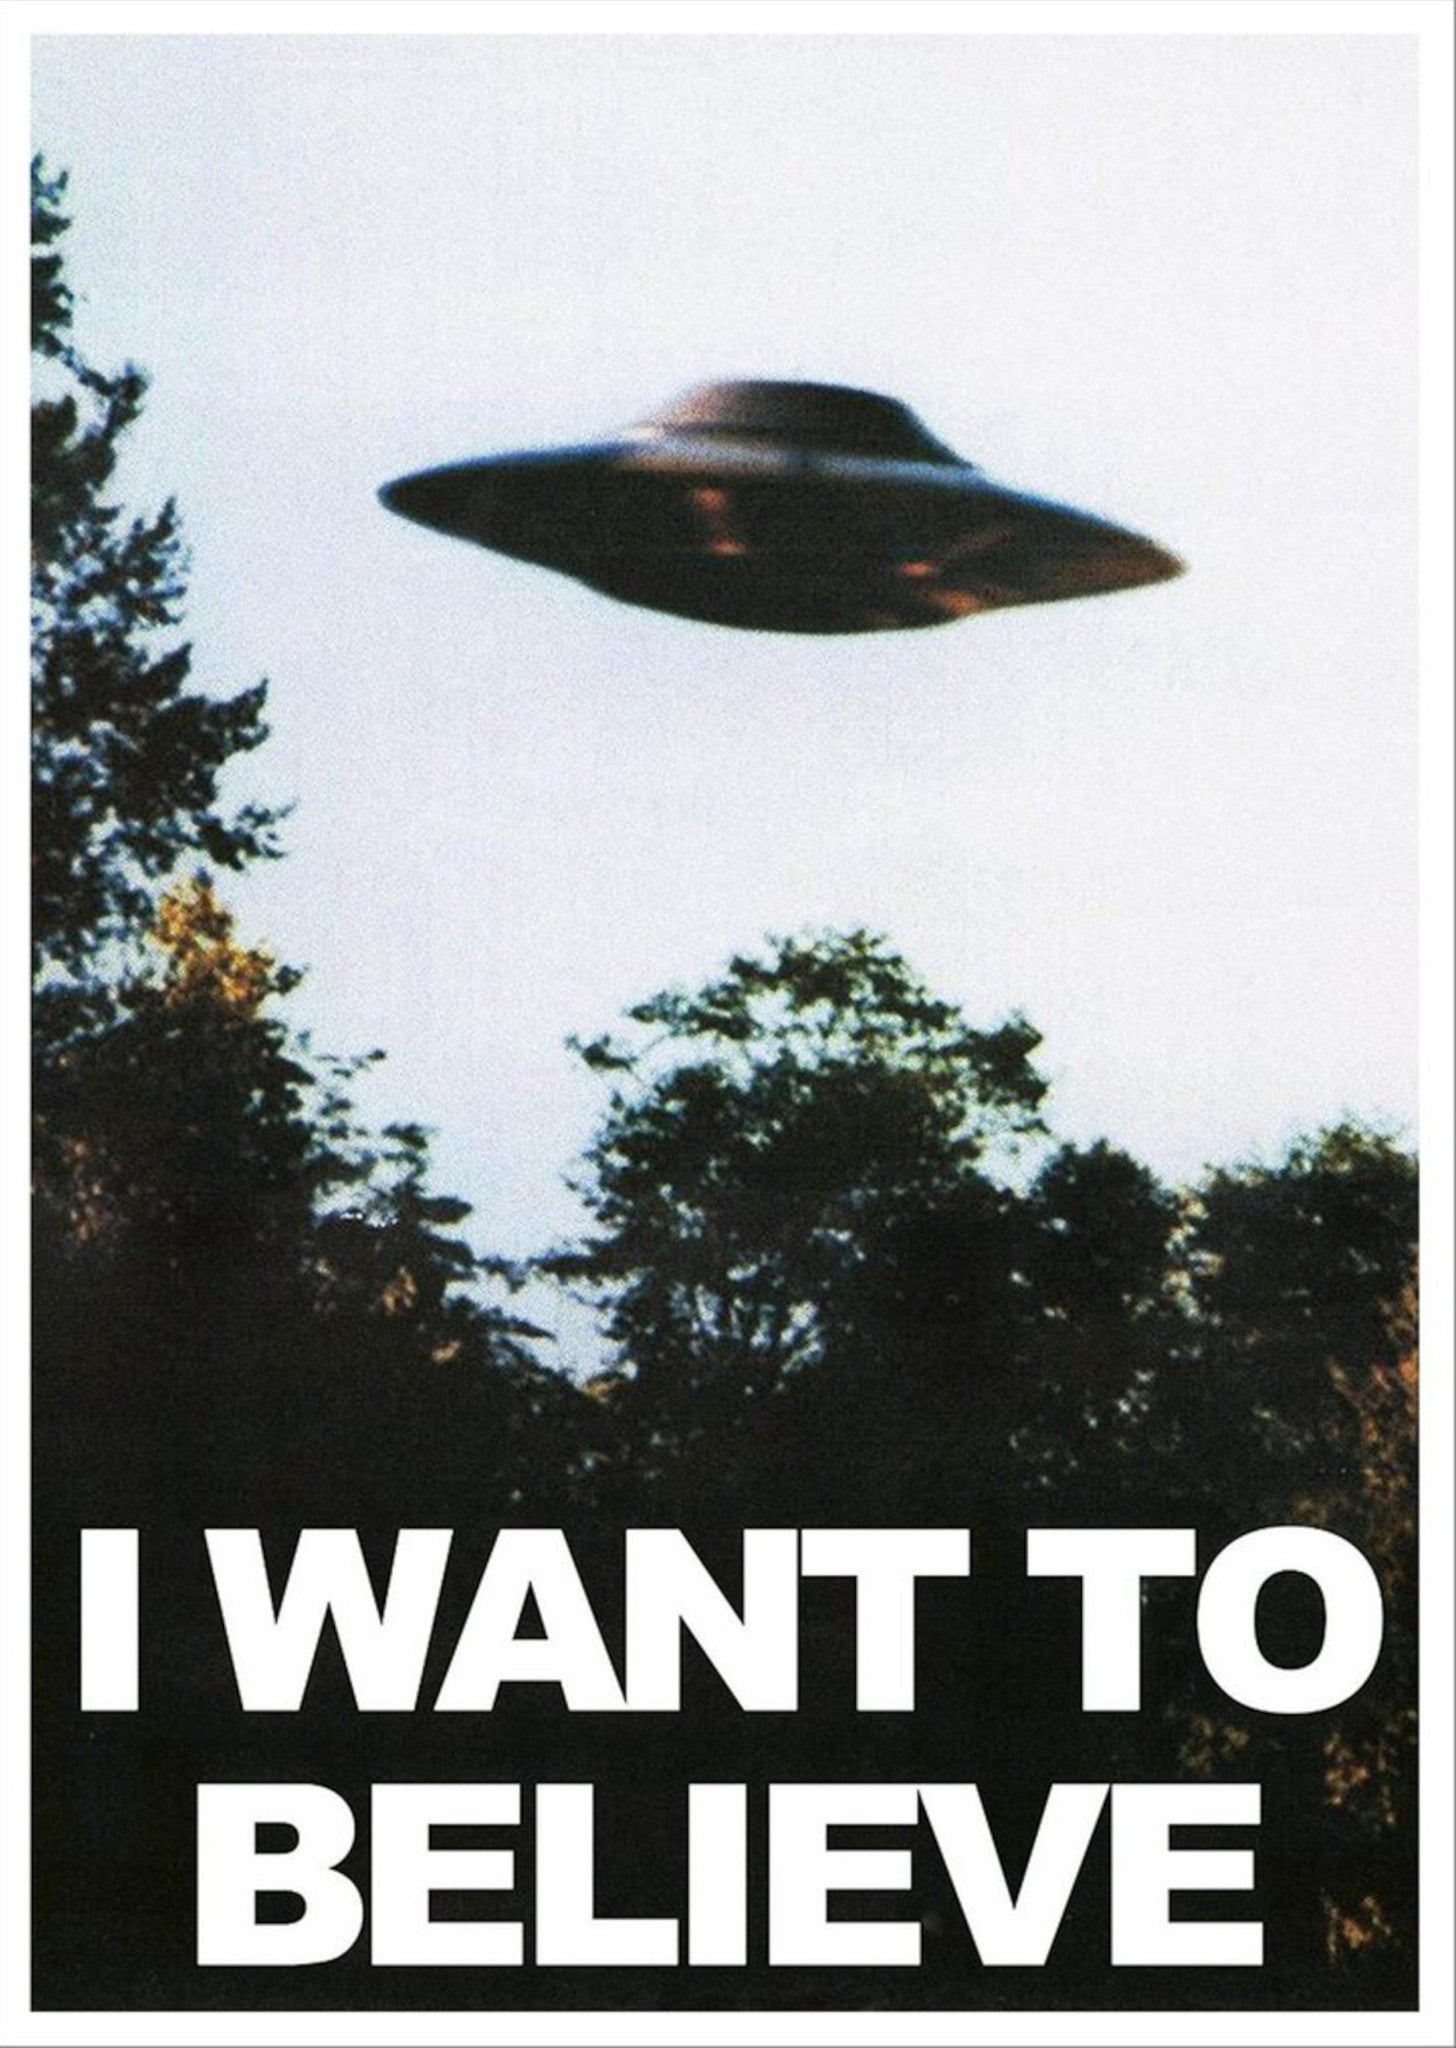 The X-Files - I Want to Believe - A4 Mini Print/Poster